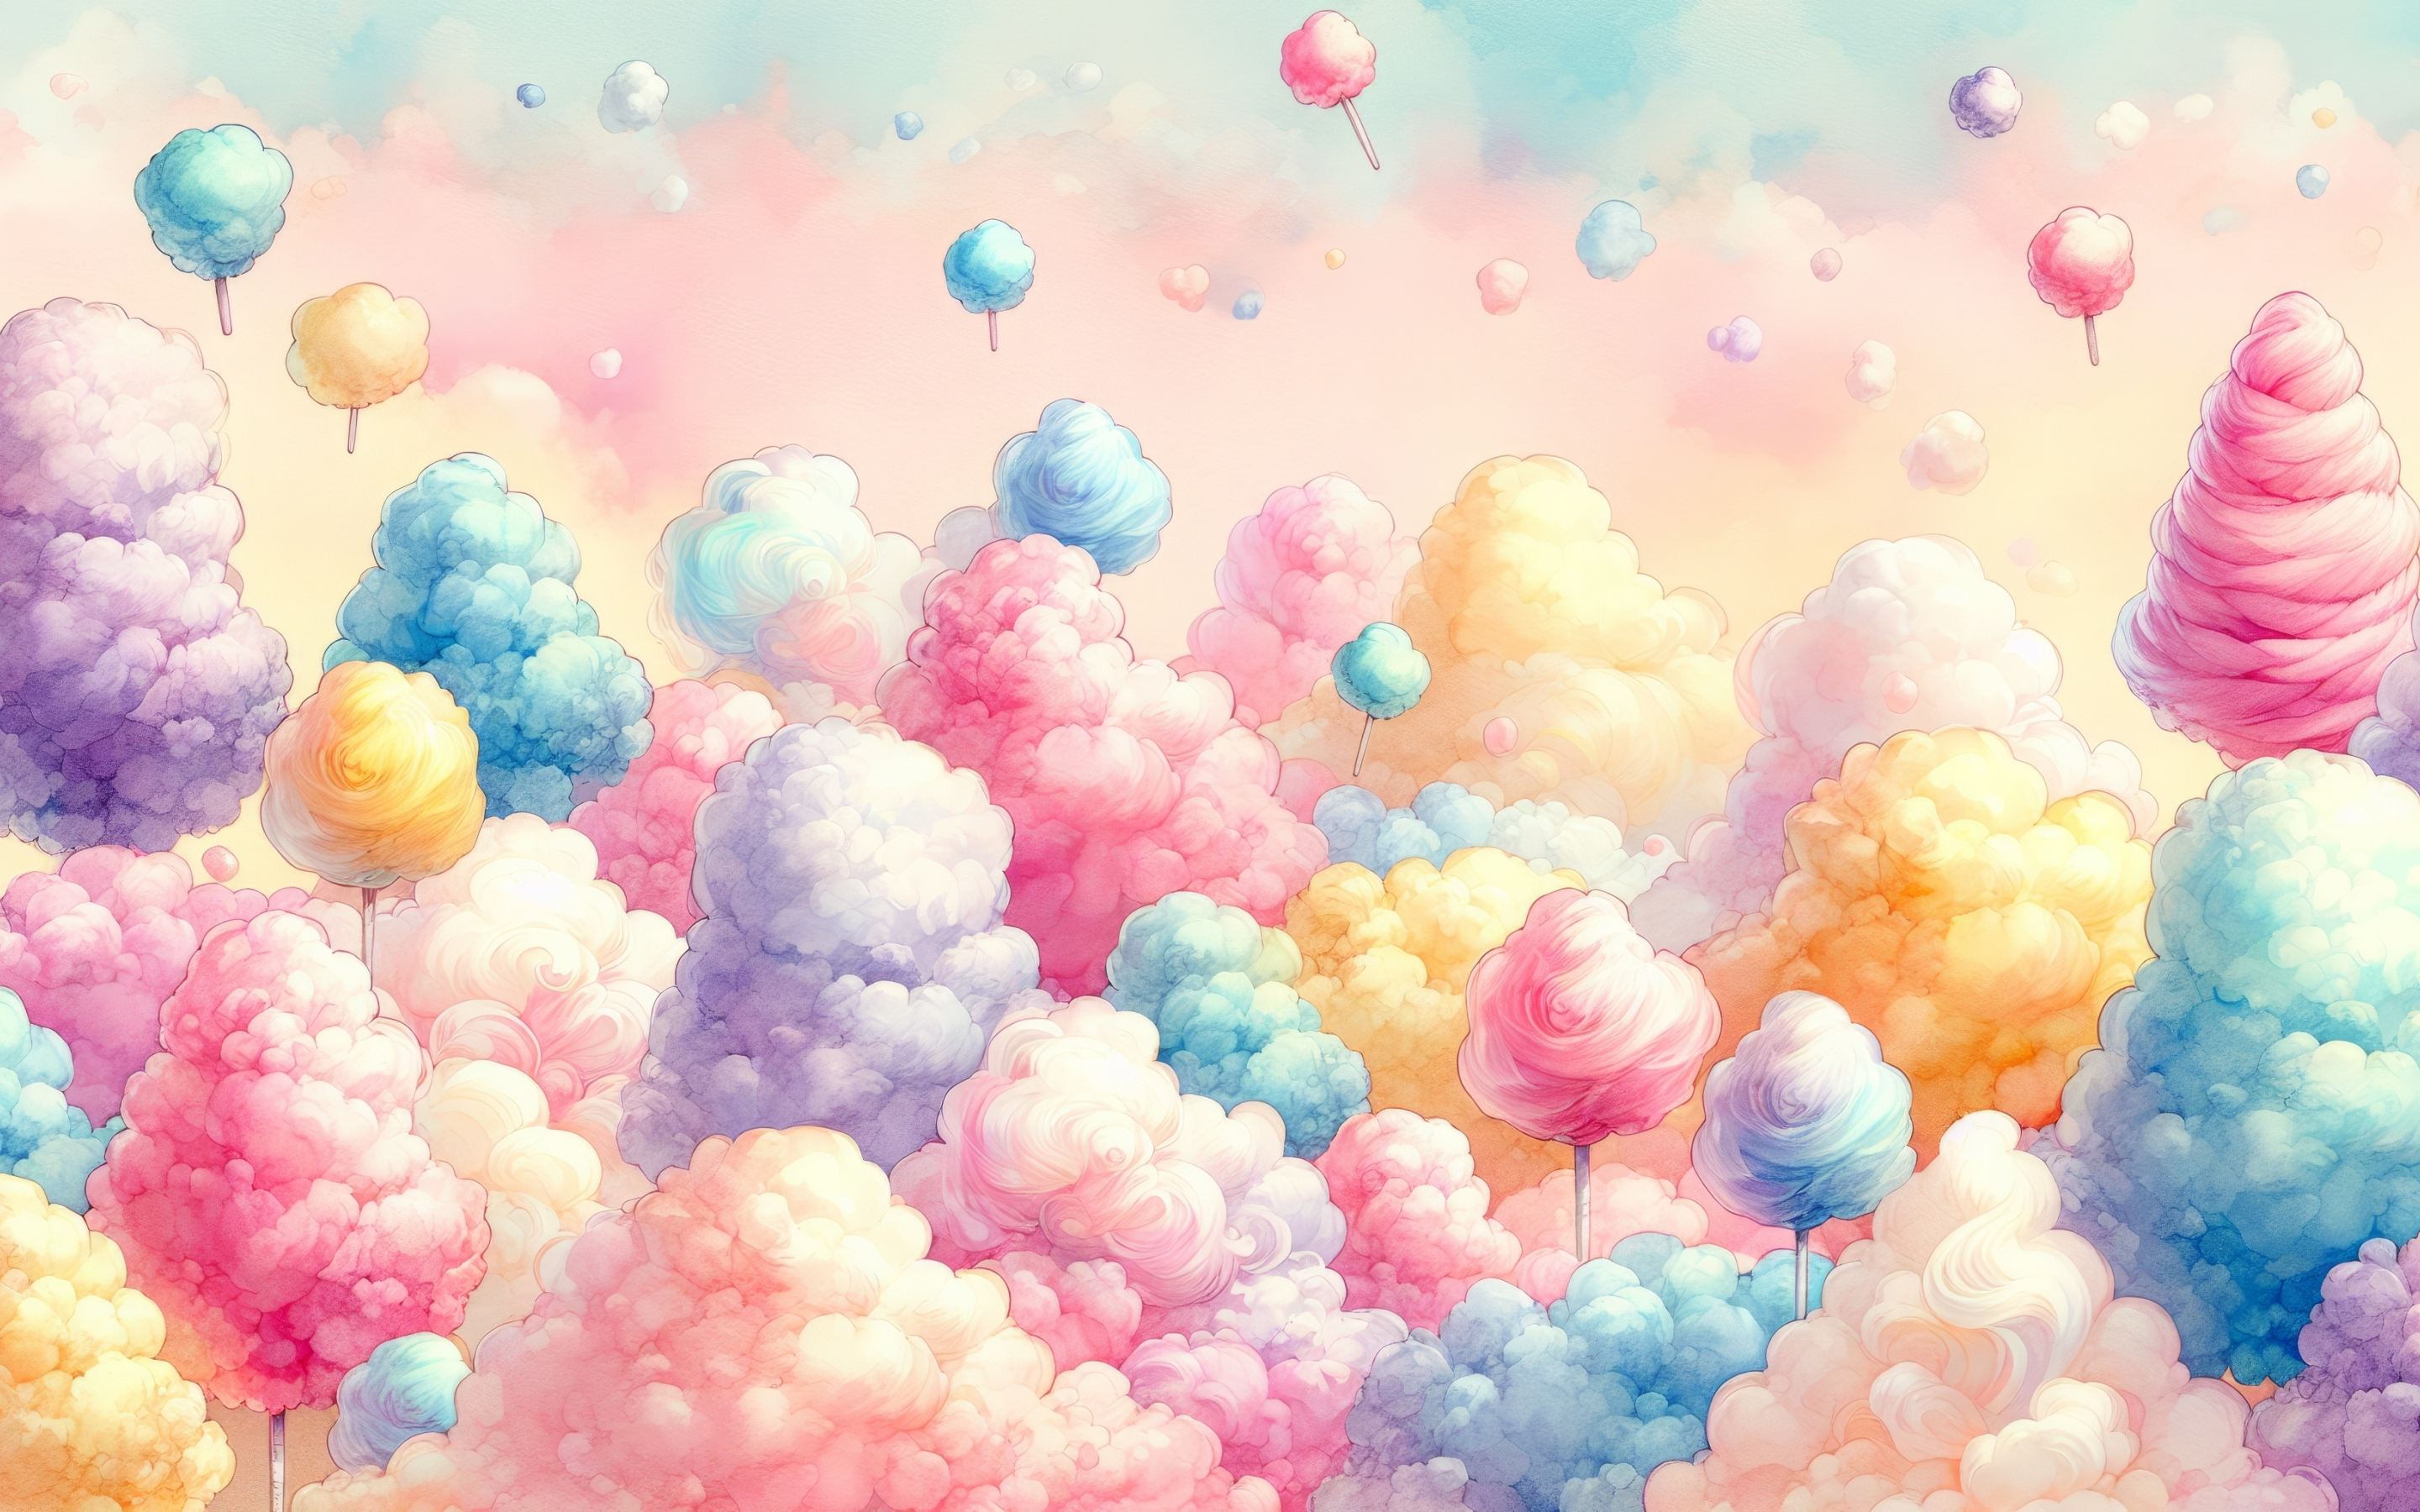 Cotton candy's clouds, colorful, art, 2880x1800 wallpaper